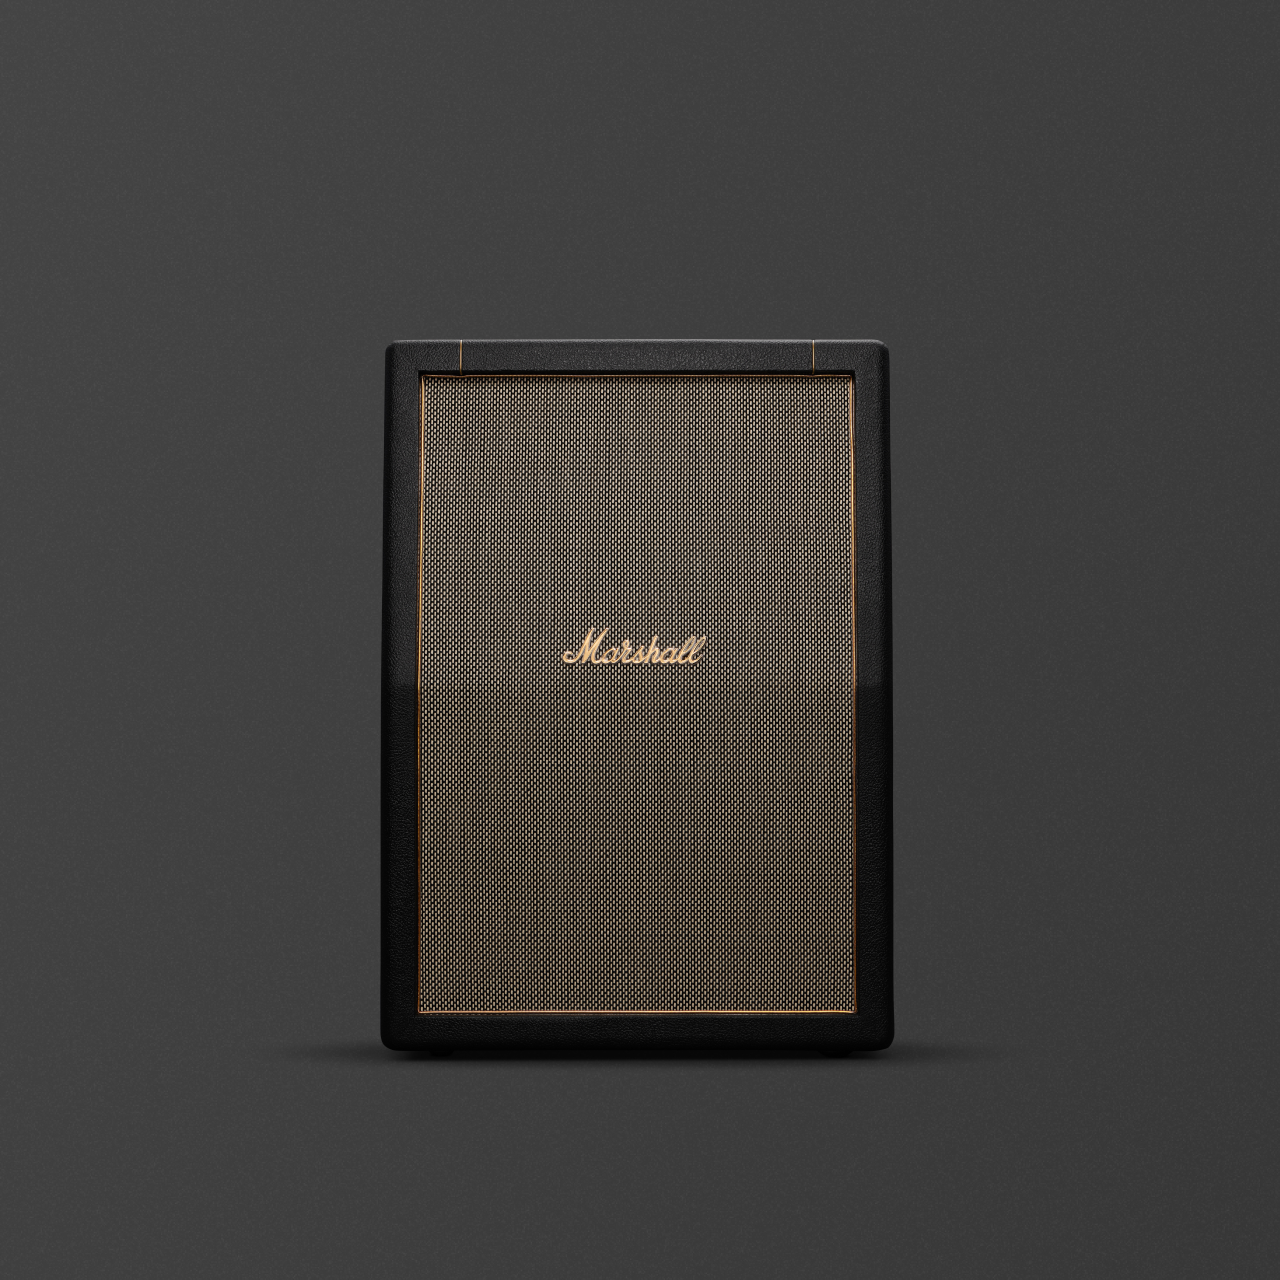 The Studio Vintage 2x12 Angled Cabinet front view. 